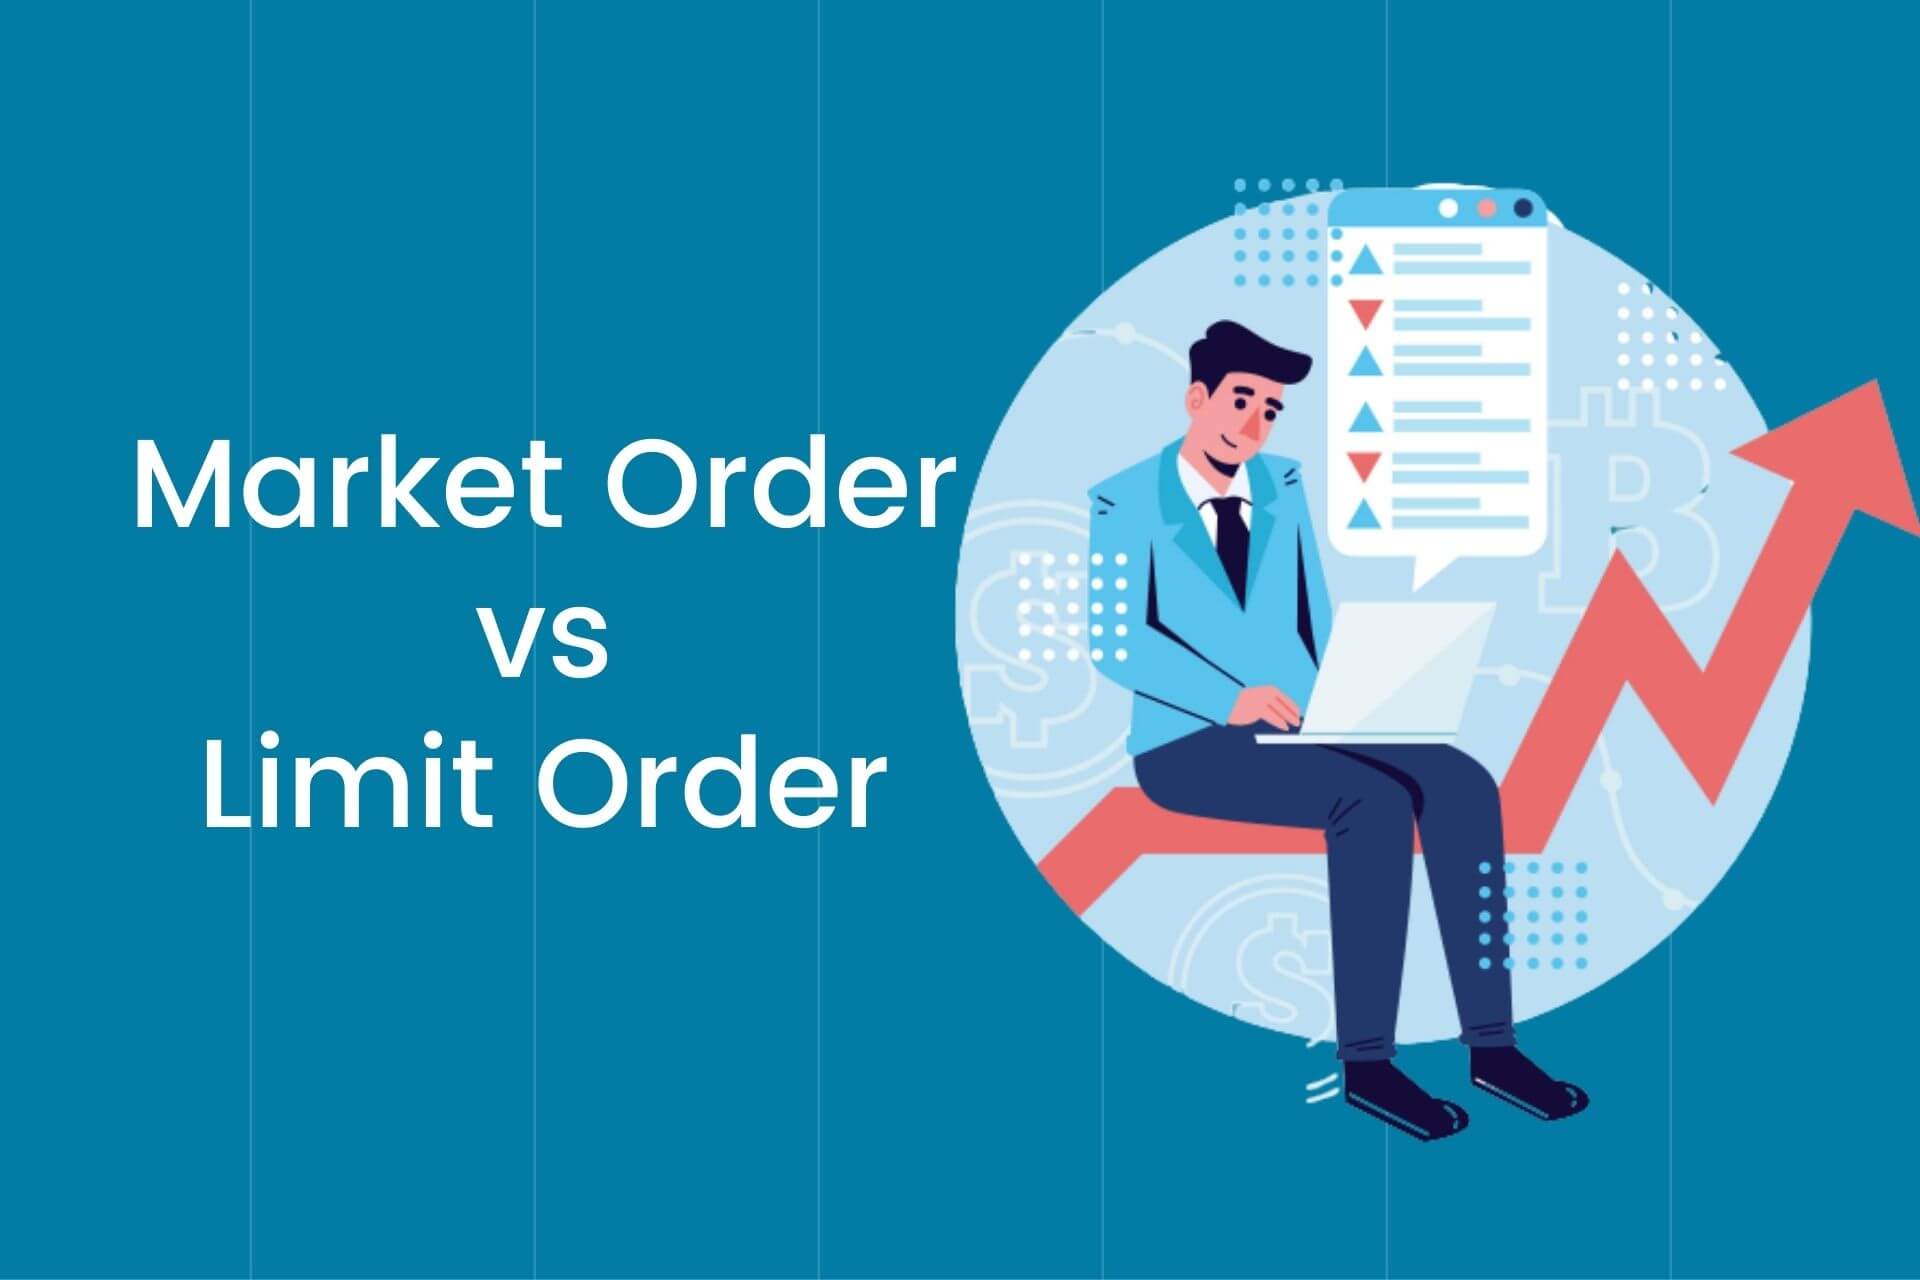 Market Order vs. Limit Order: Which One to Use When?